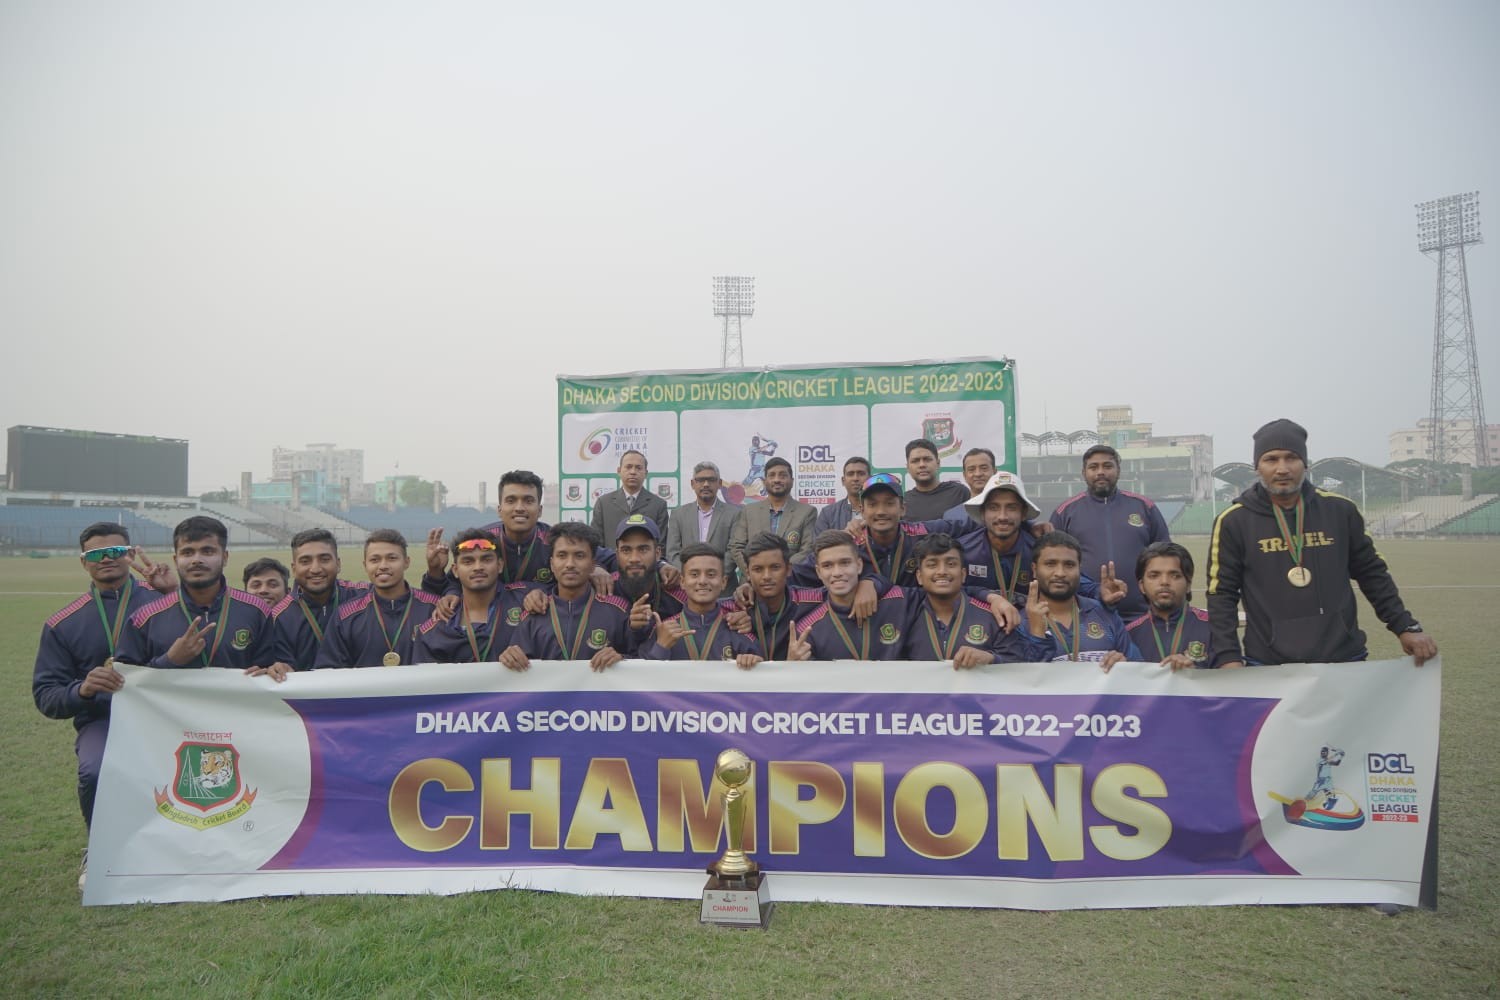 Gulshan Cricket Club became the champion of Dhaka Second Division Cricket League 2022-2023